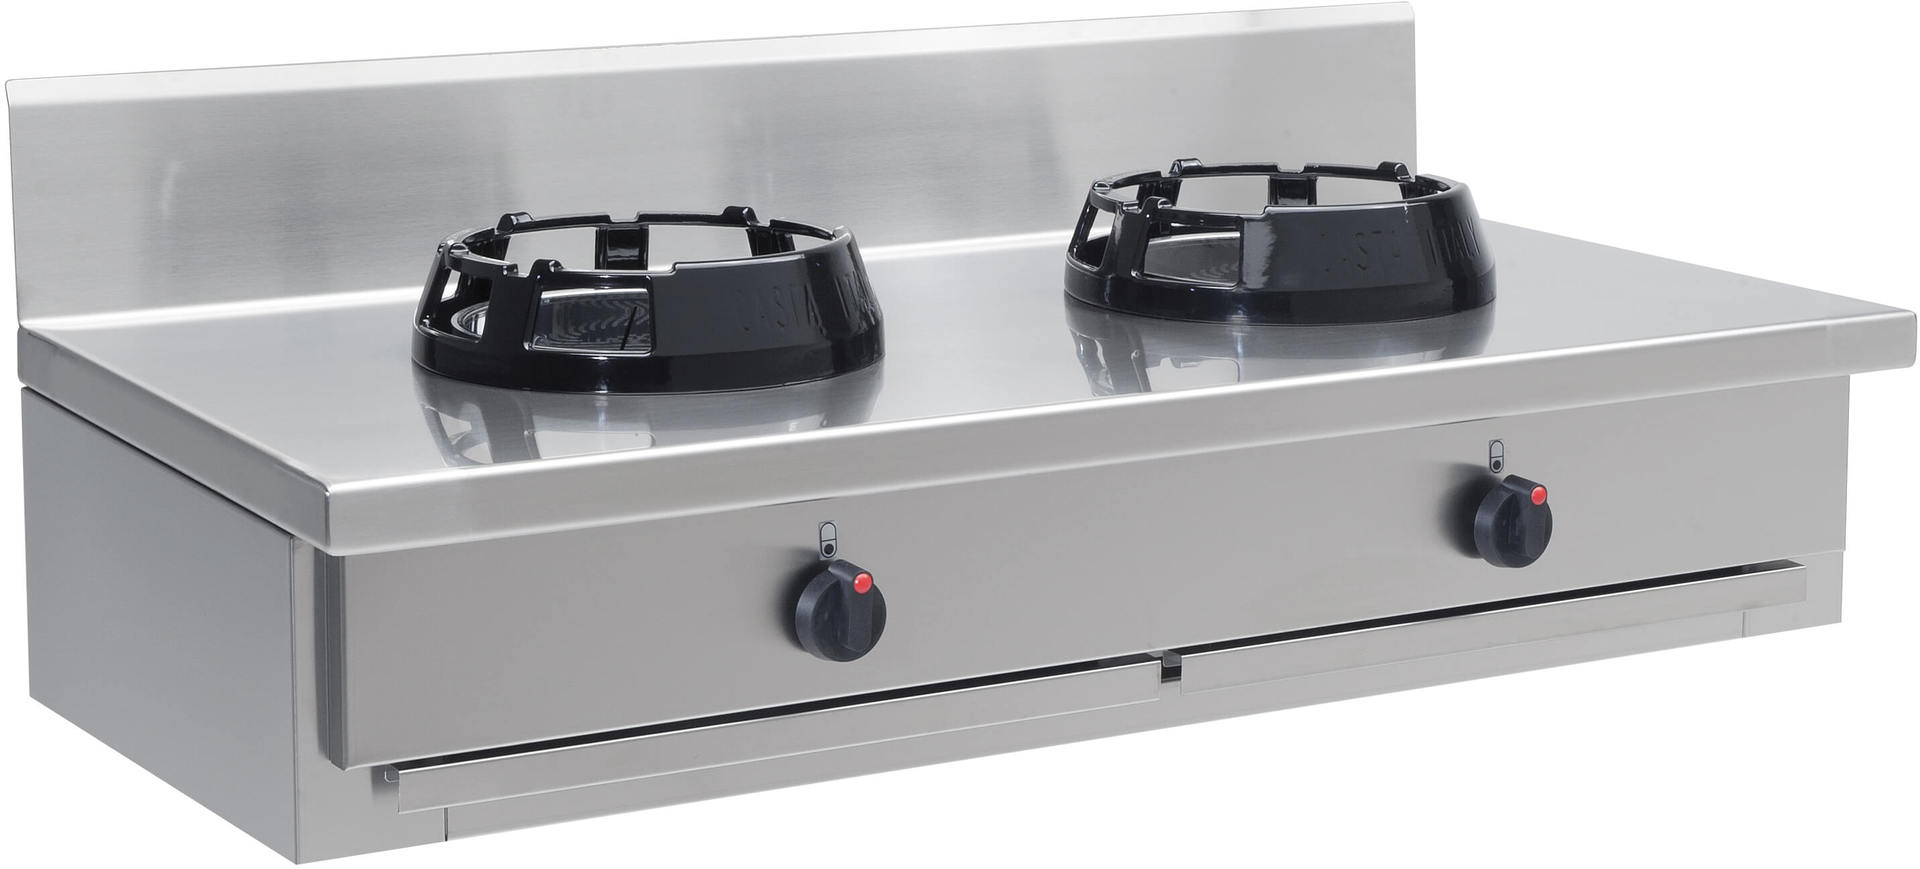 The wok gas stove is placed on the table with 2 burners